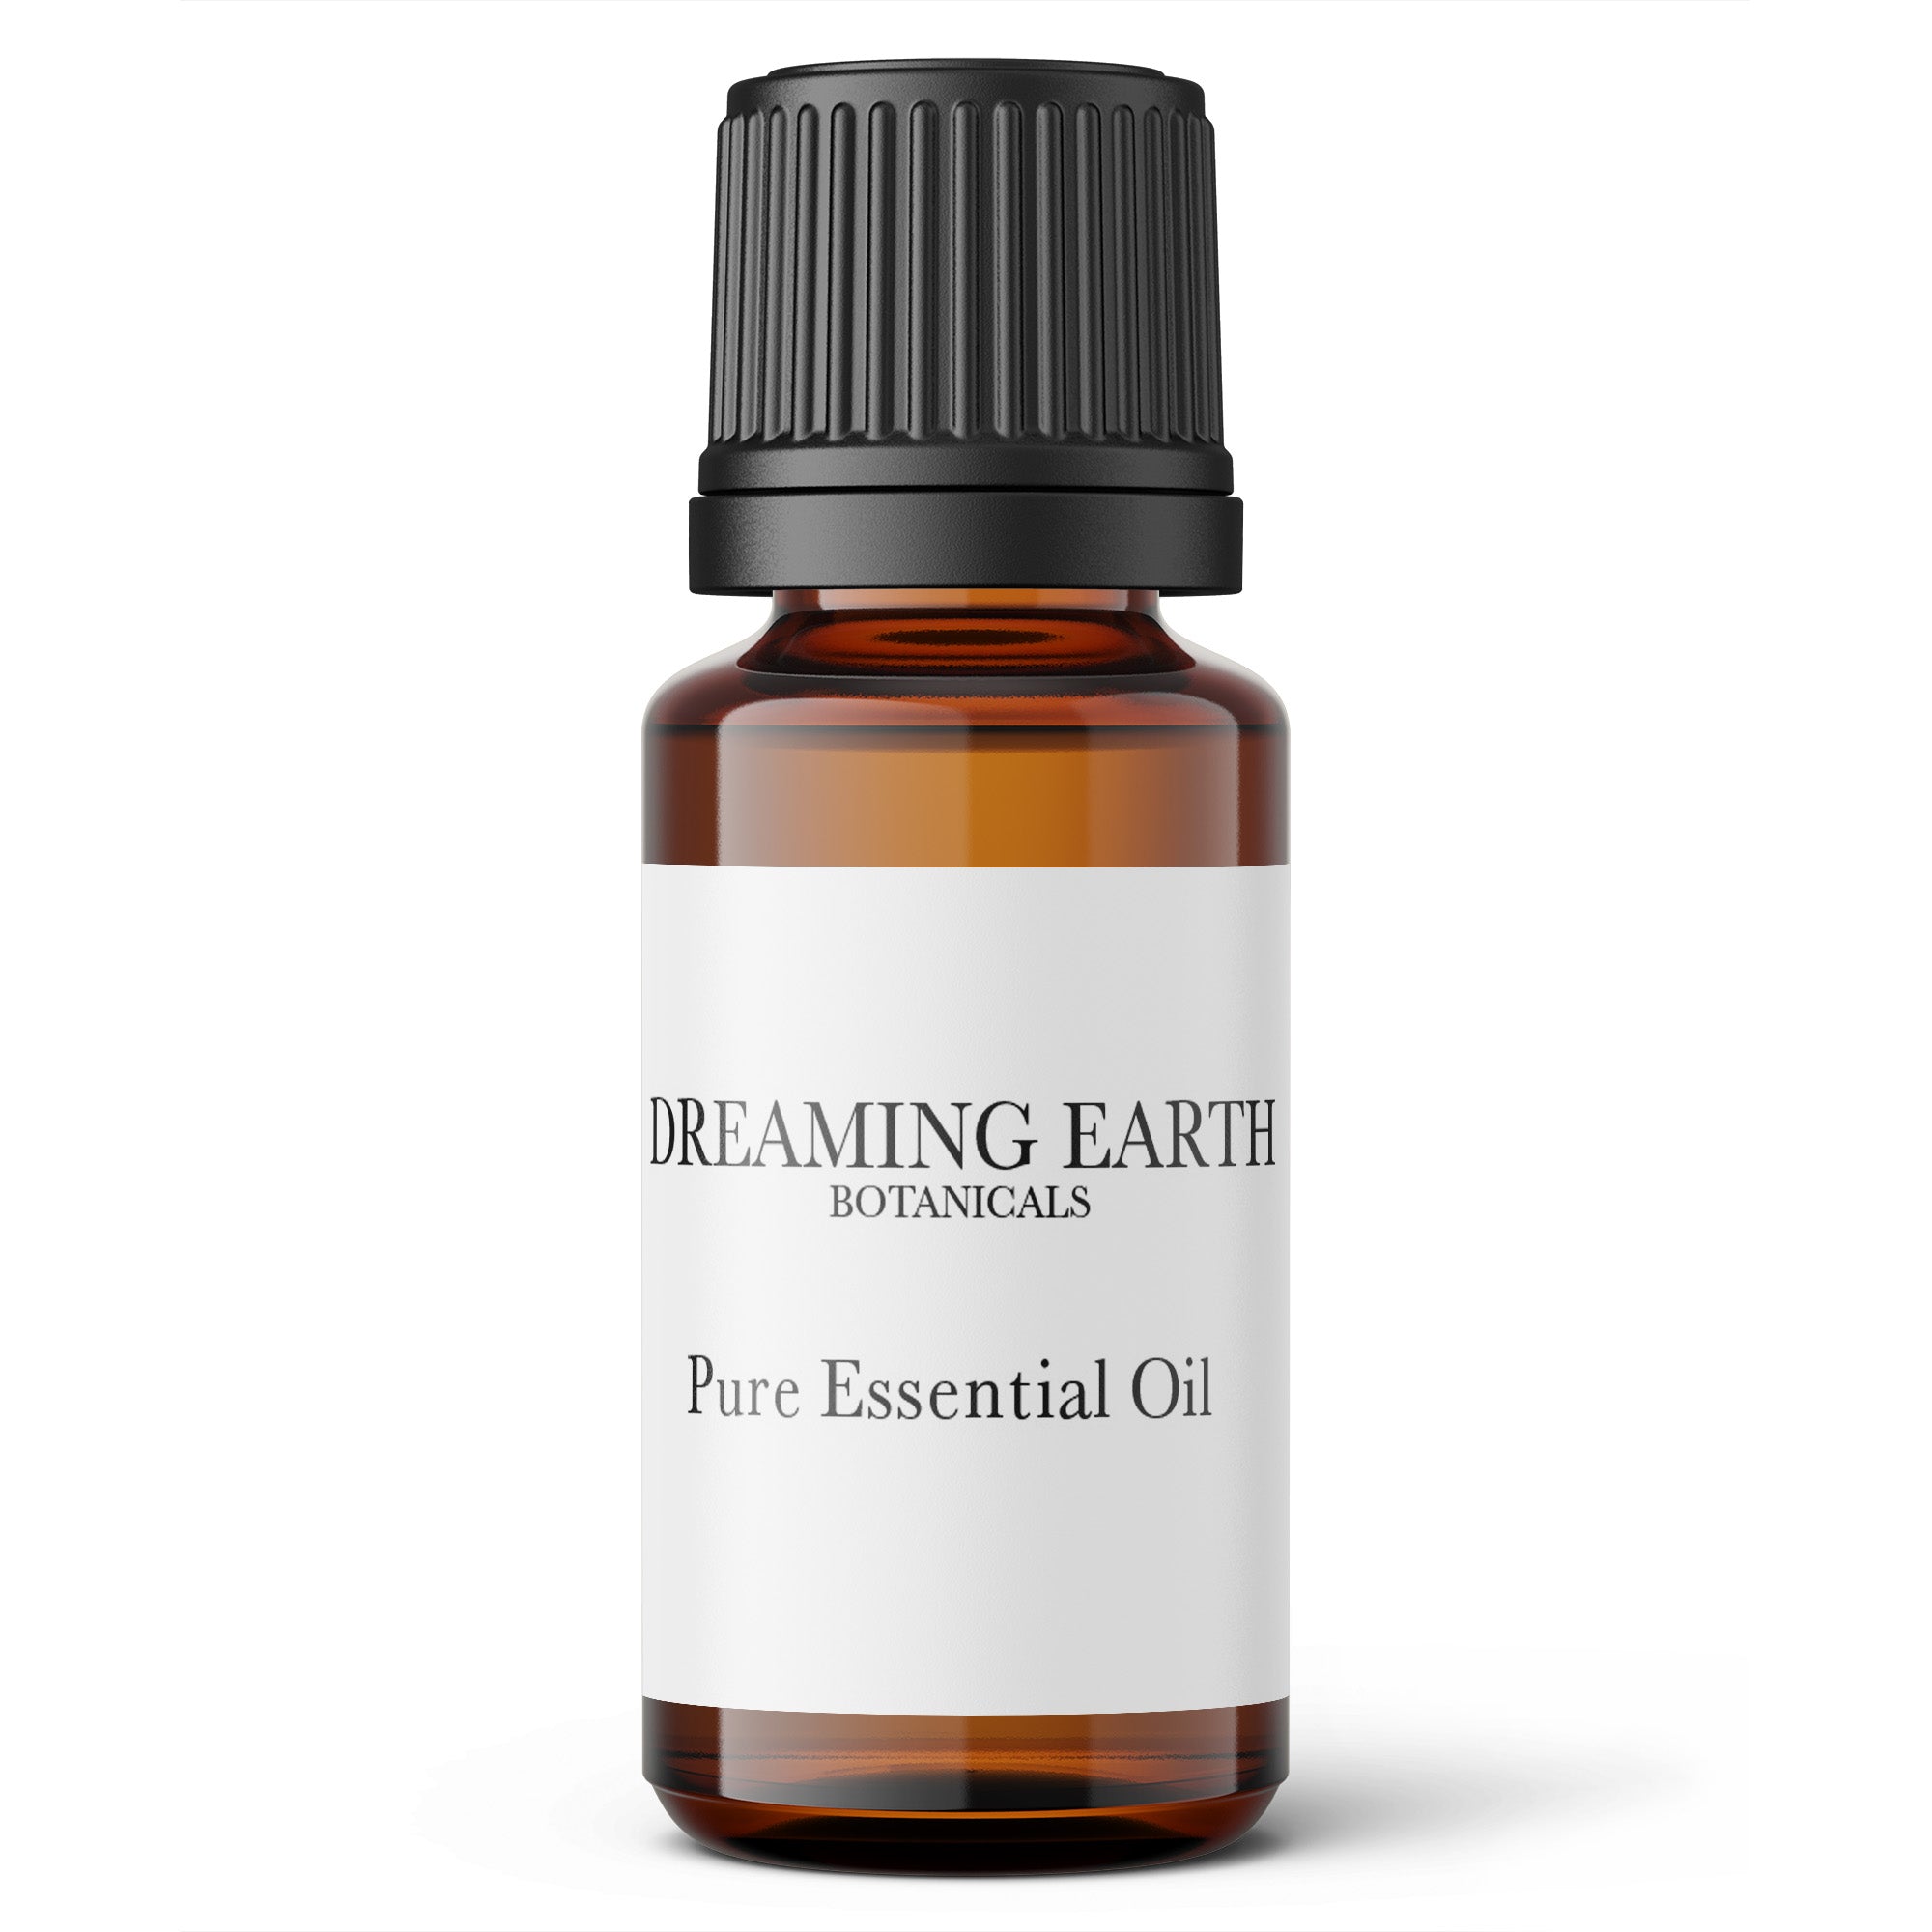 Load image into Gallery viewer, Vetiver Essential Oil - Dreaming Earth Inc
